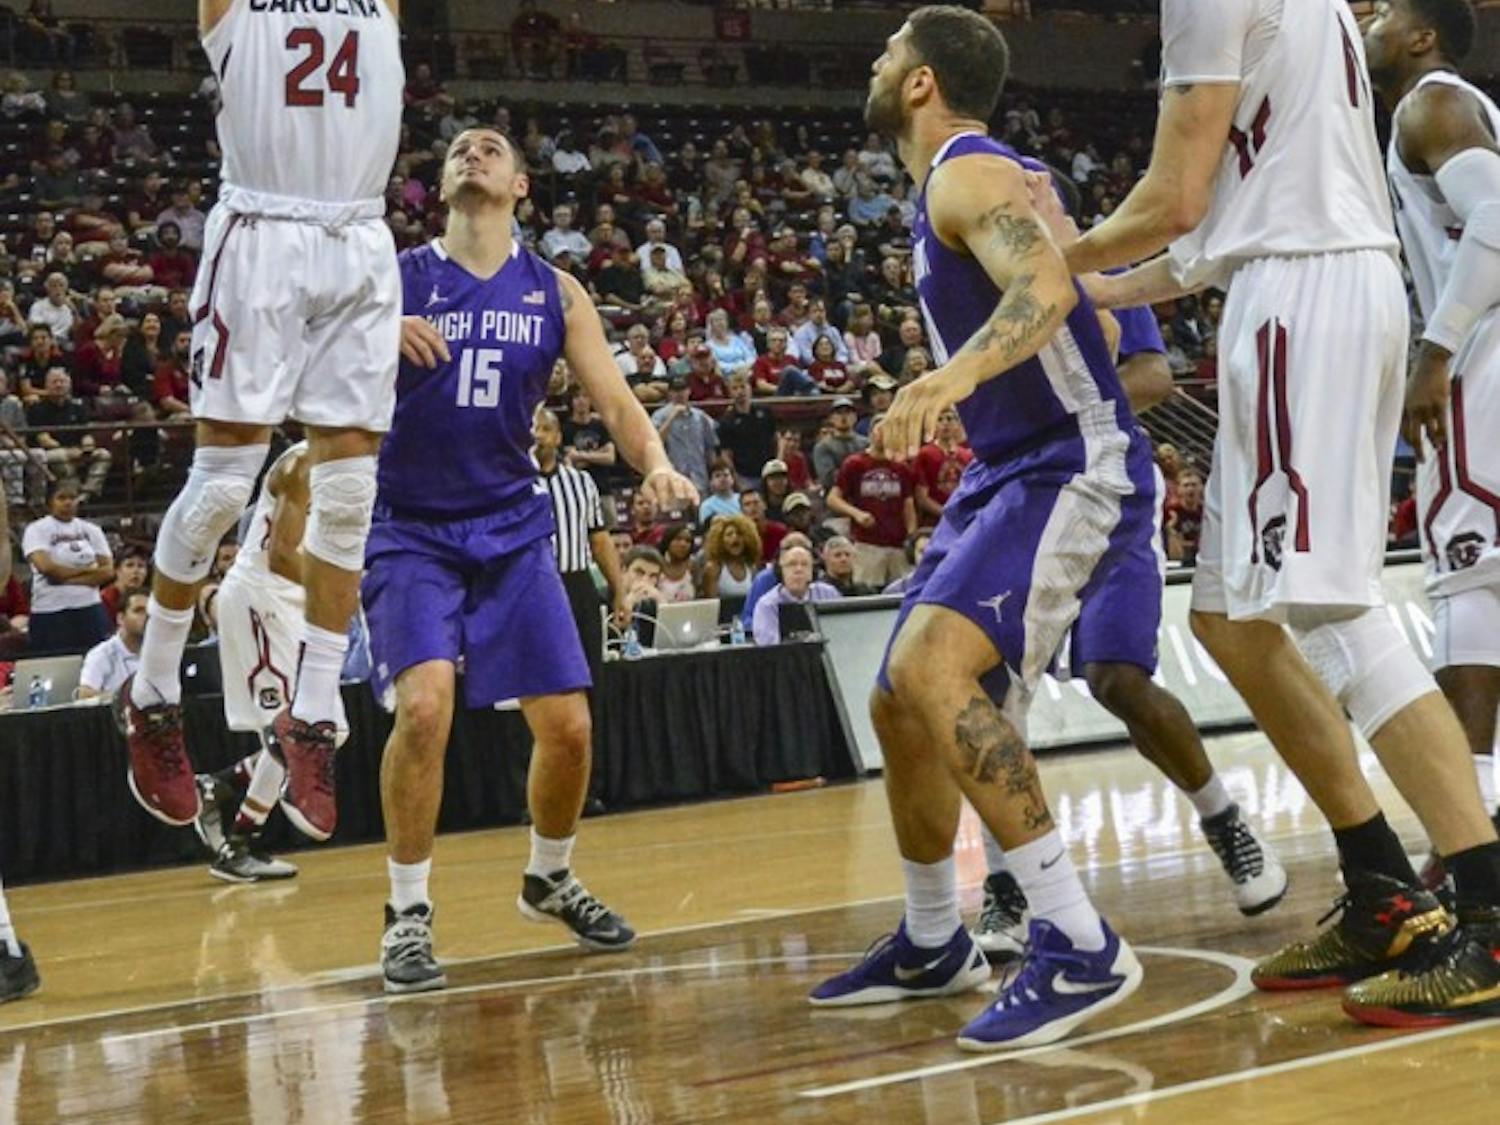 The men's basketball team redeemed itself Tuesday night with an 88 to 66 win against High Point University.